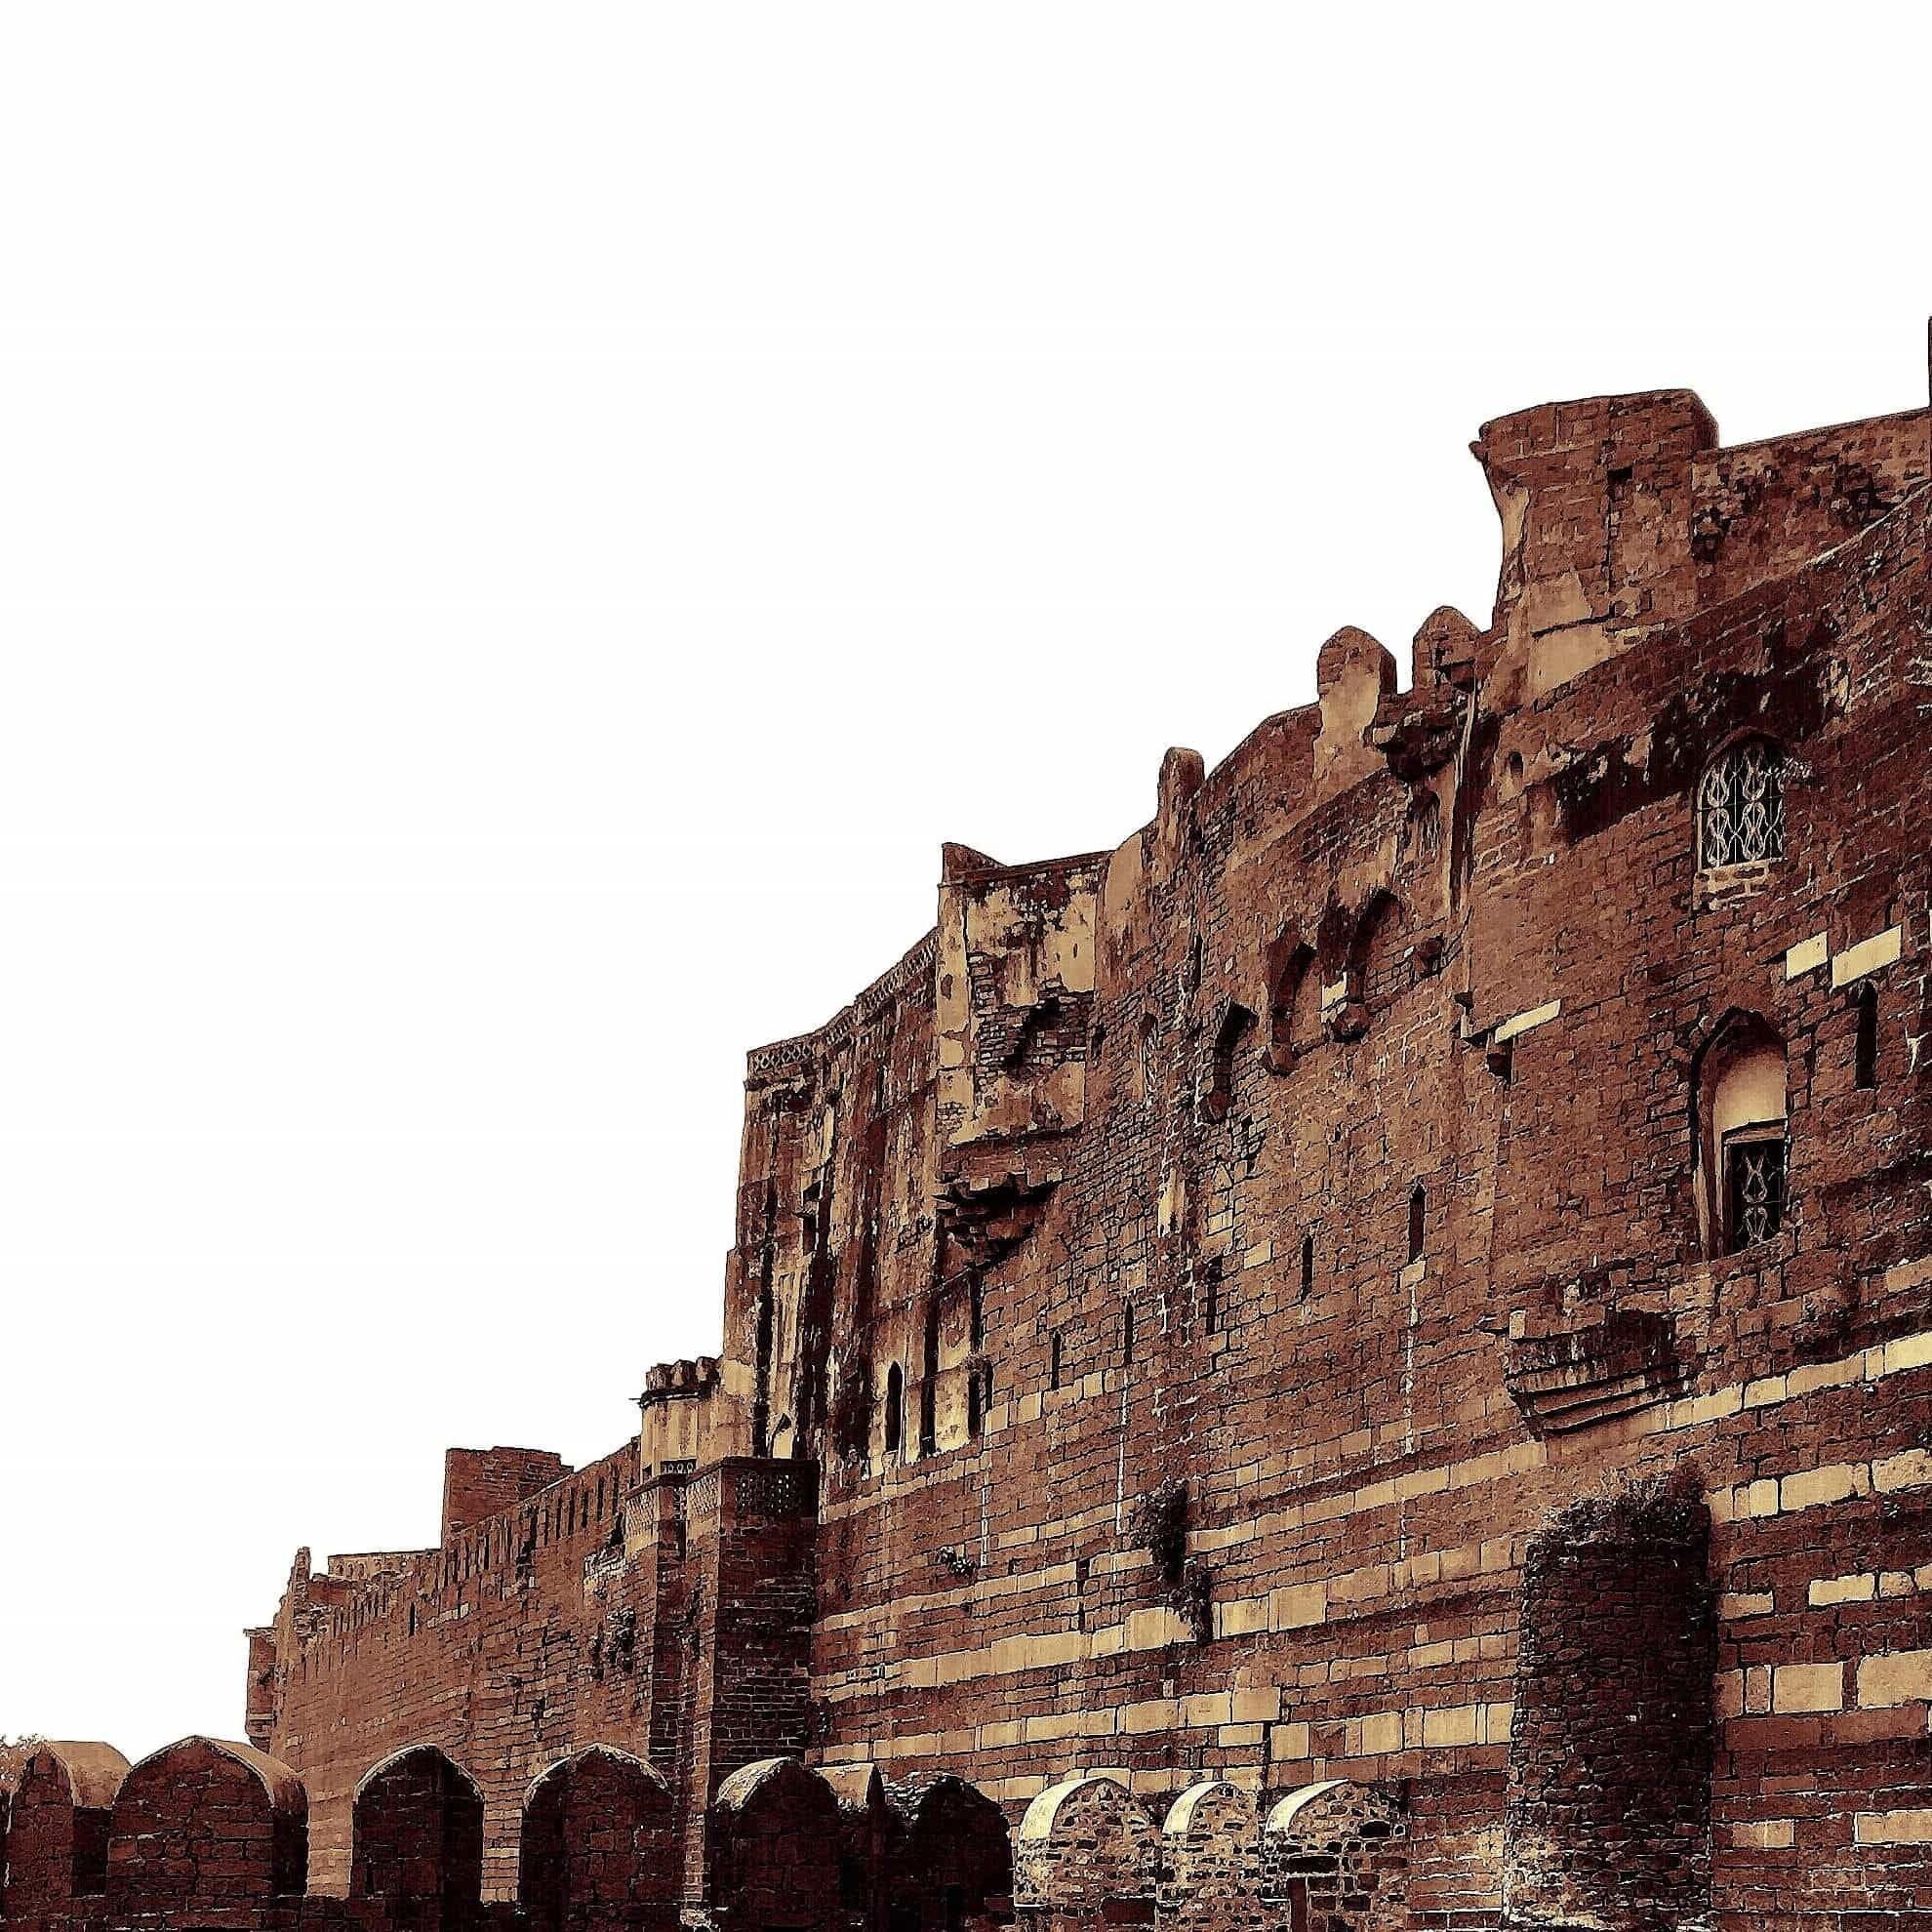 The Bidar Fort - An Example of the Architecture of Permanence